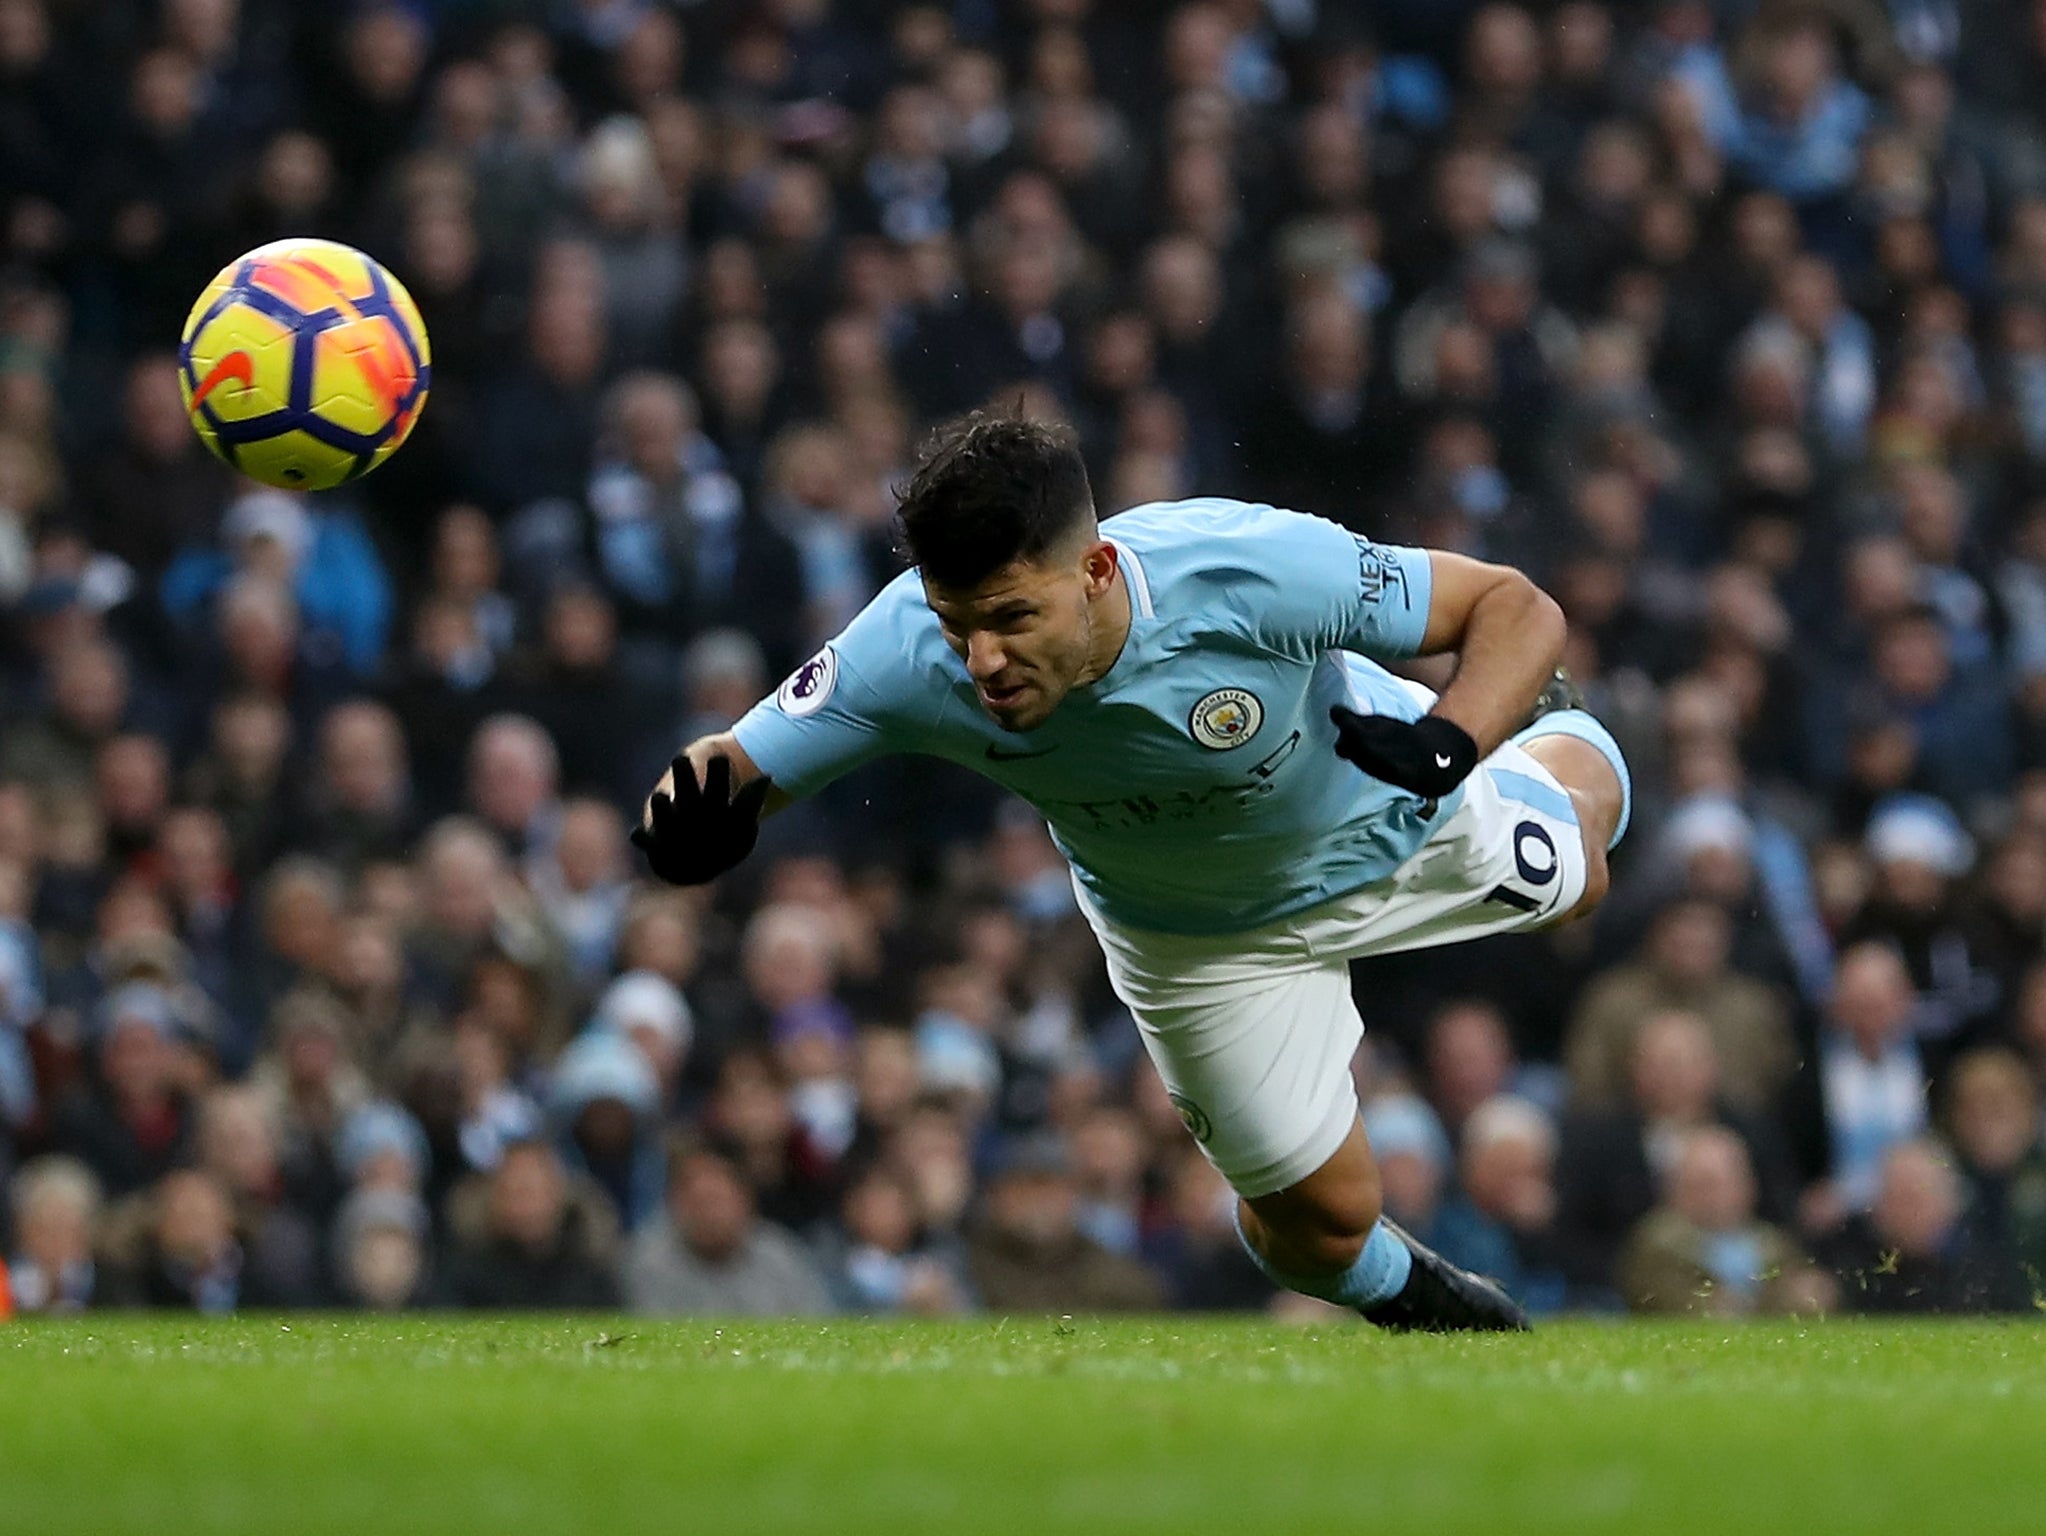 Aguero nodded Manchester City into the lead